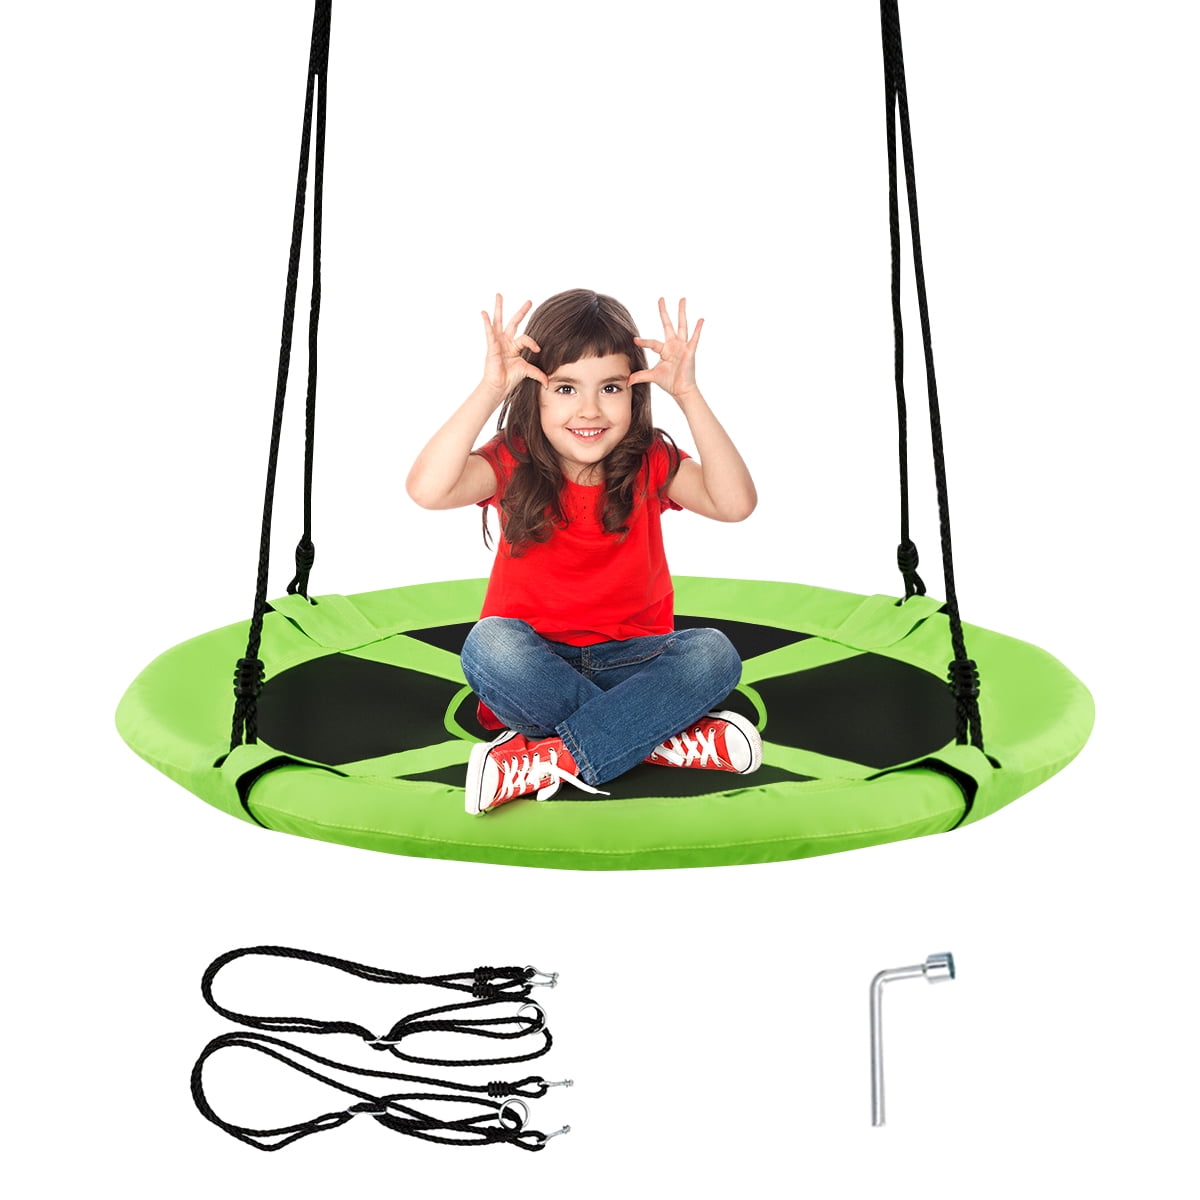 40" Flying Mat Saucer Tree Swing Nest Rope 264lb for Kids Adult In/Outdoor Play 